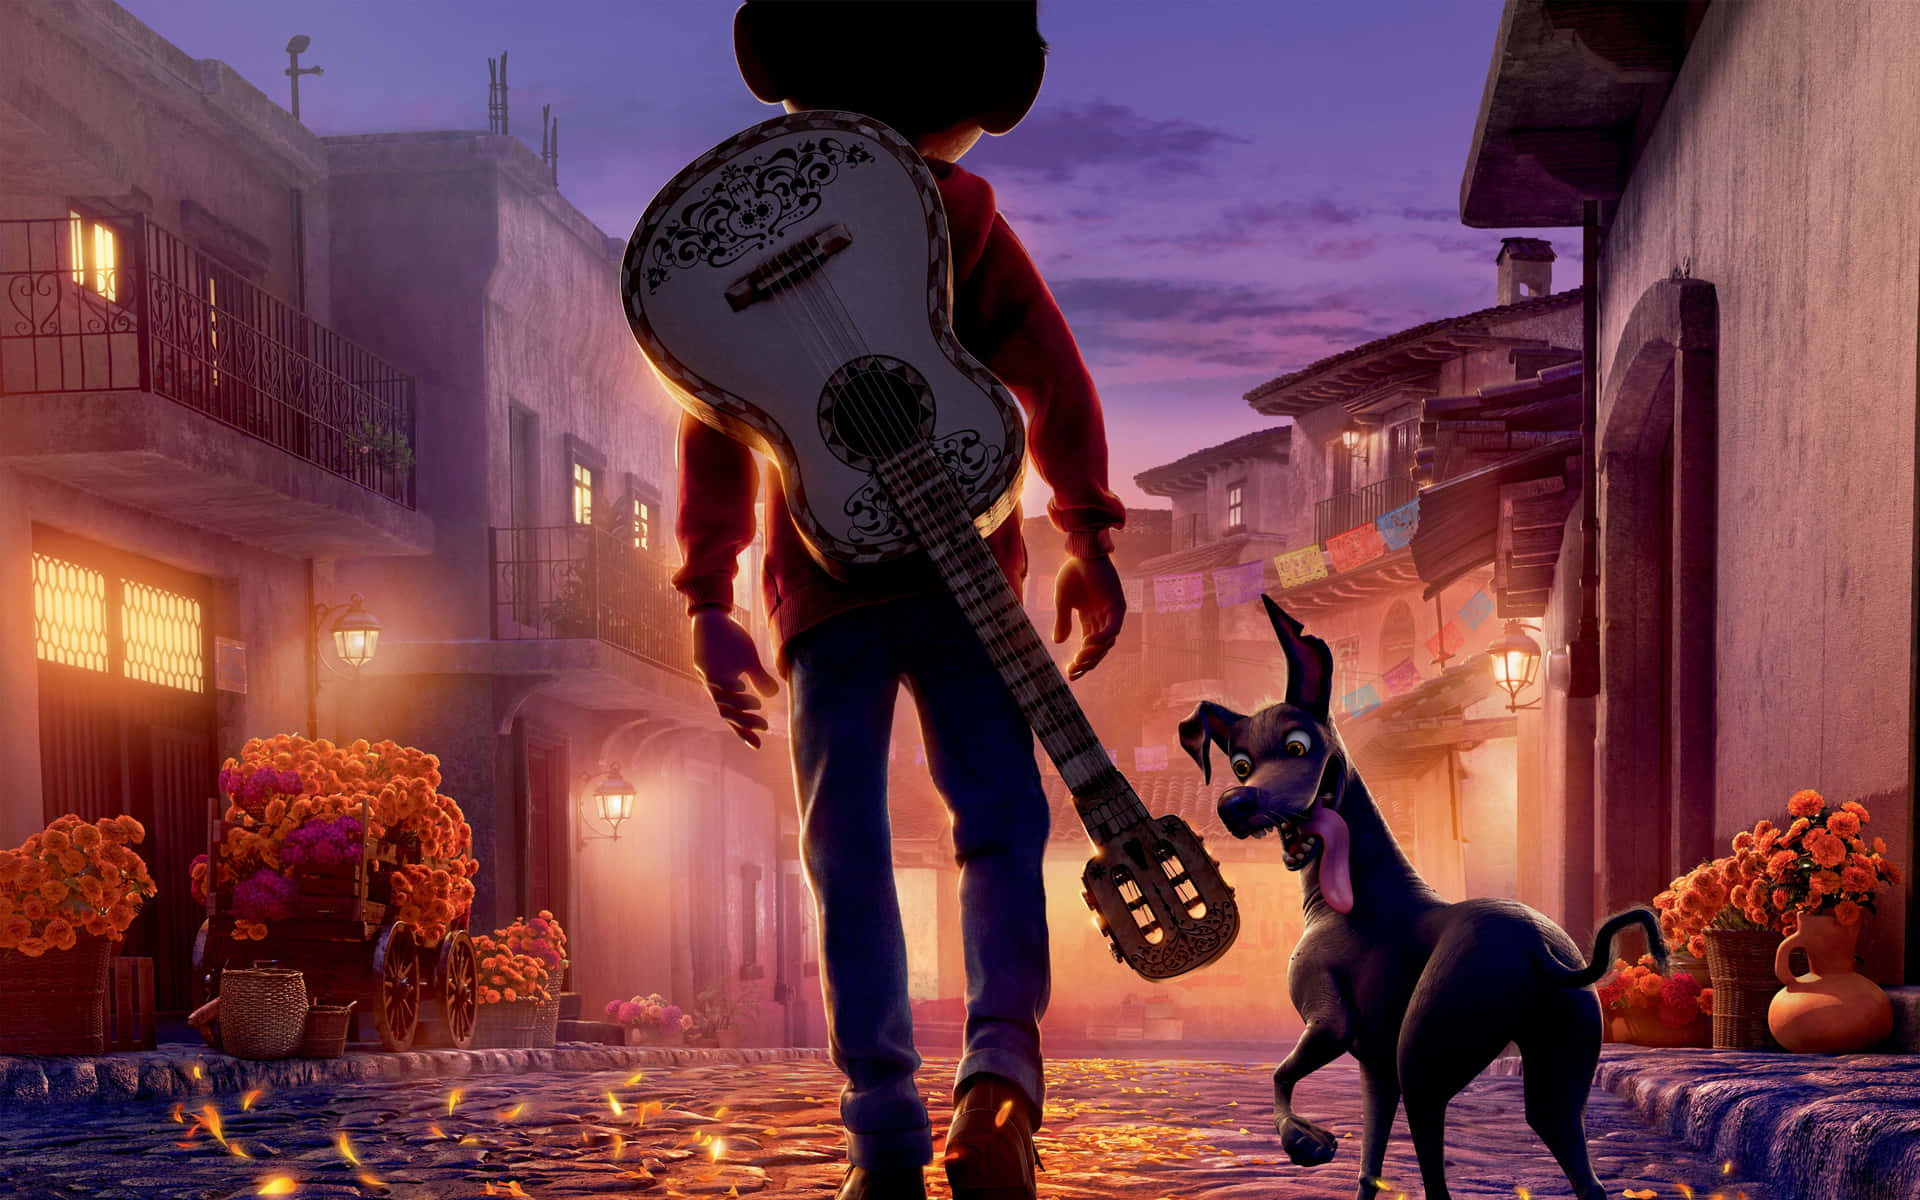 Enter the Land of the Dead with an Unforgettable Adventure in Disney•Pixar’s “Coco” Wallpaper